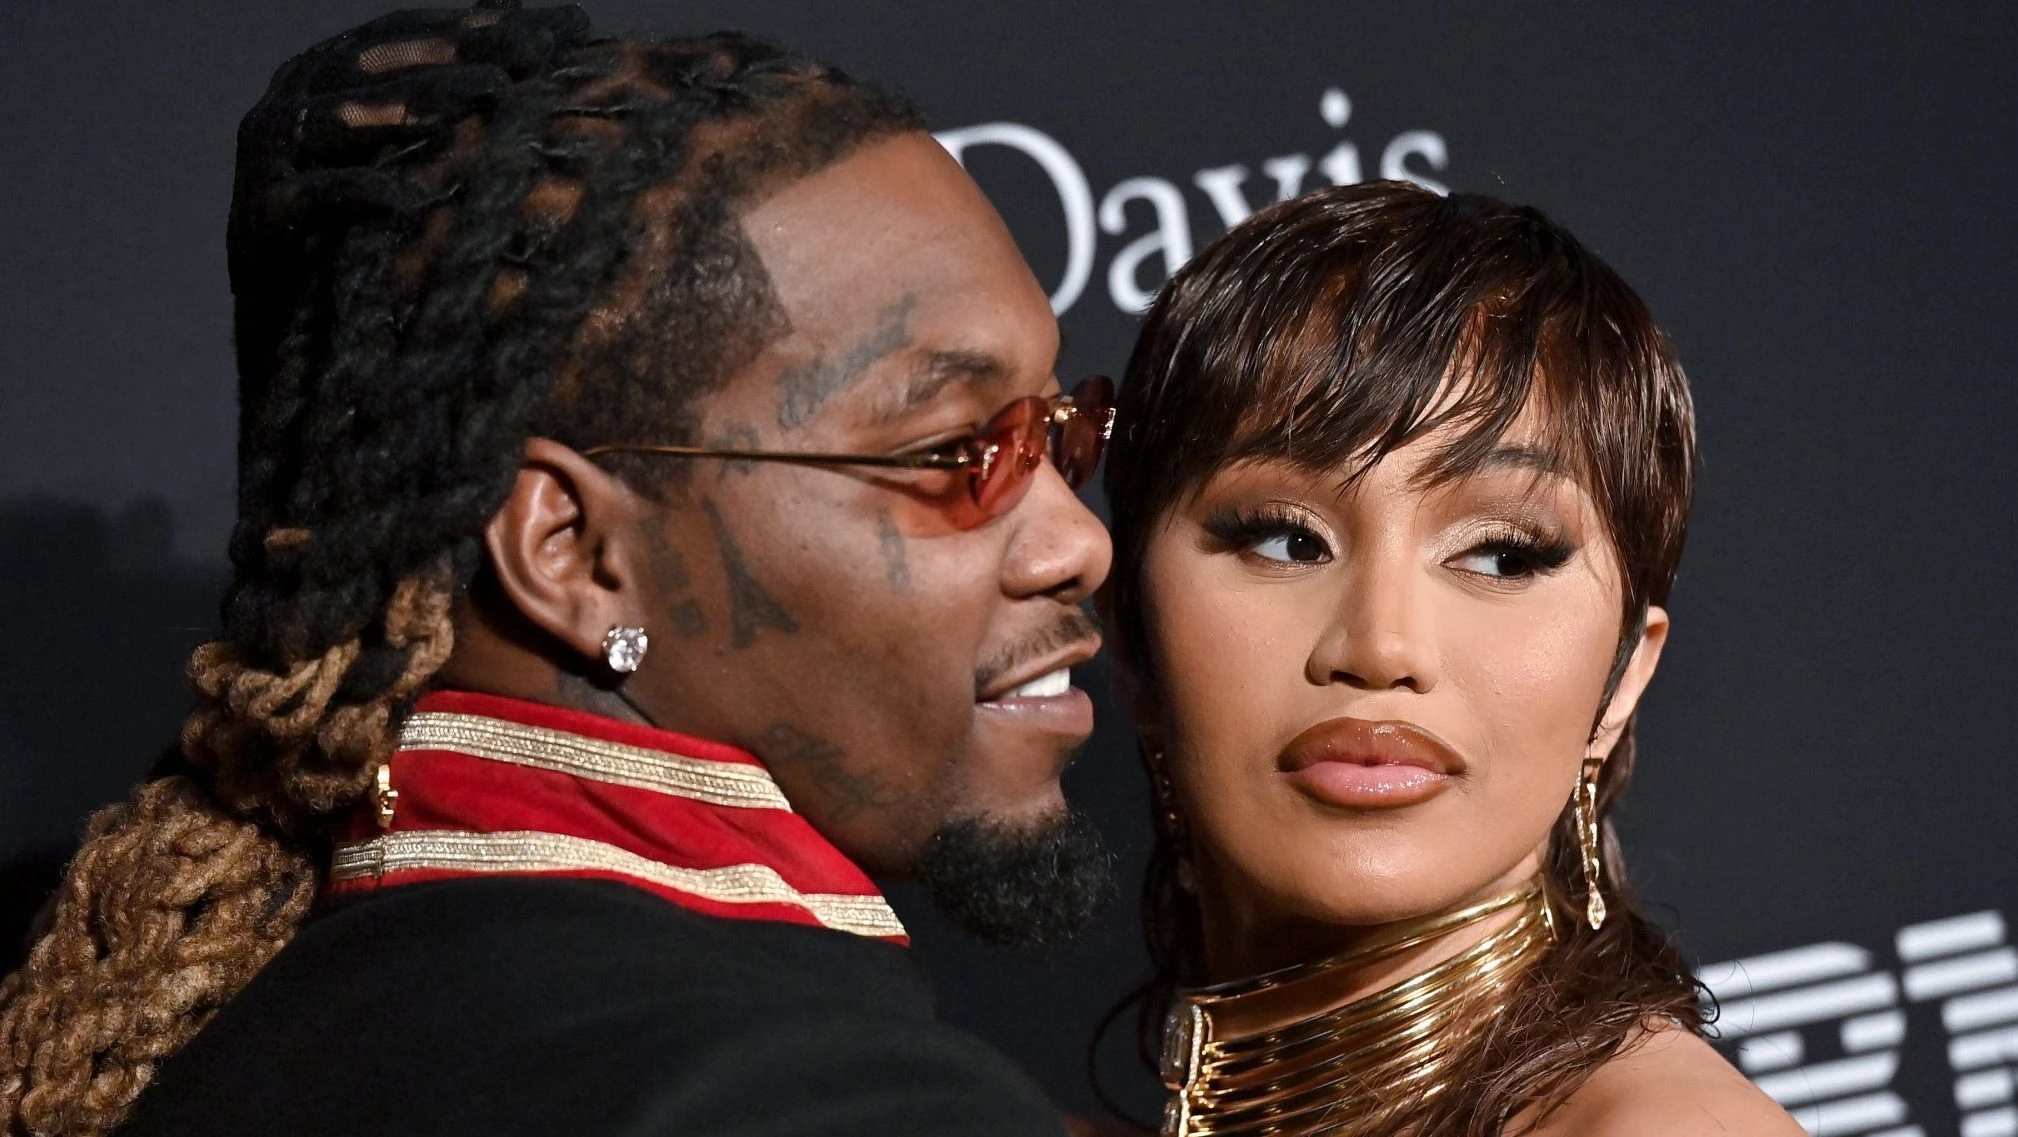 Offset appeared to imply Cardi B cheated on him and she was quick to clap back